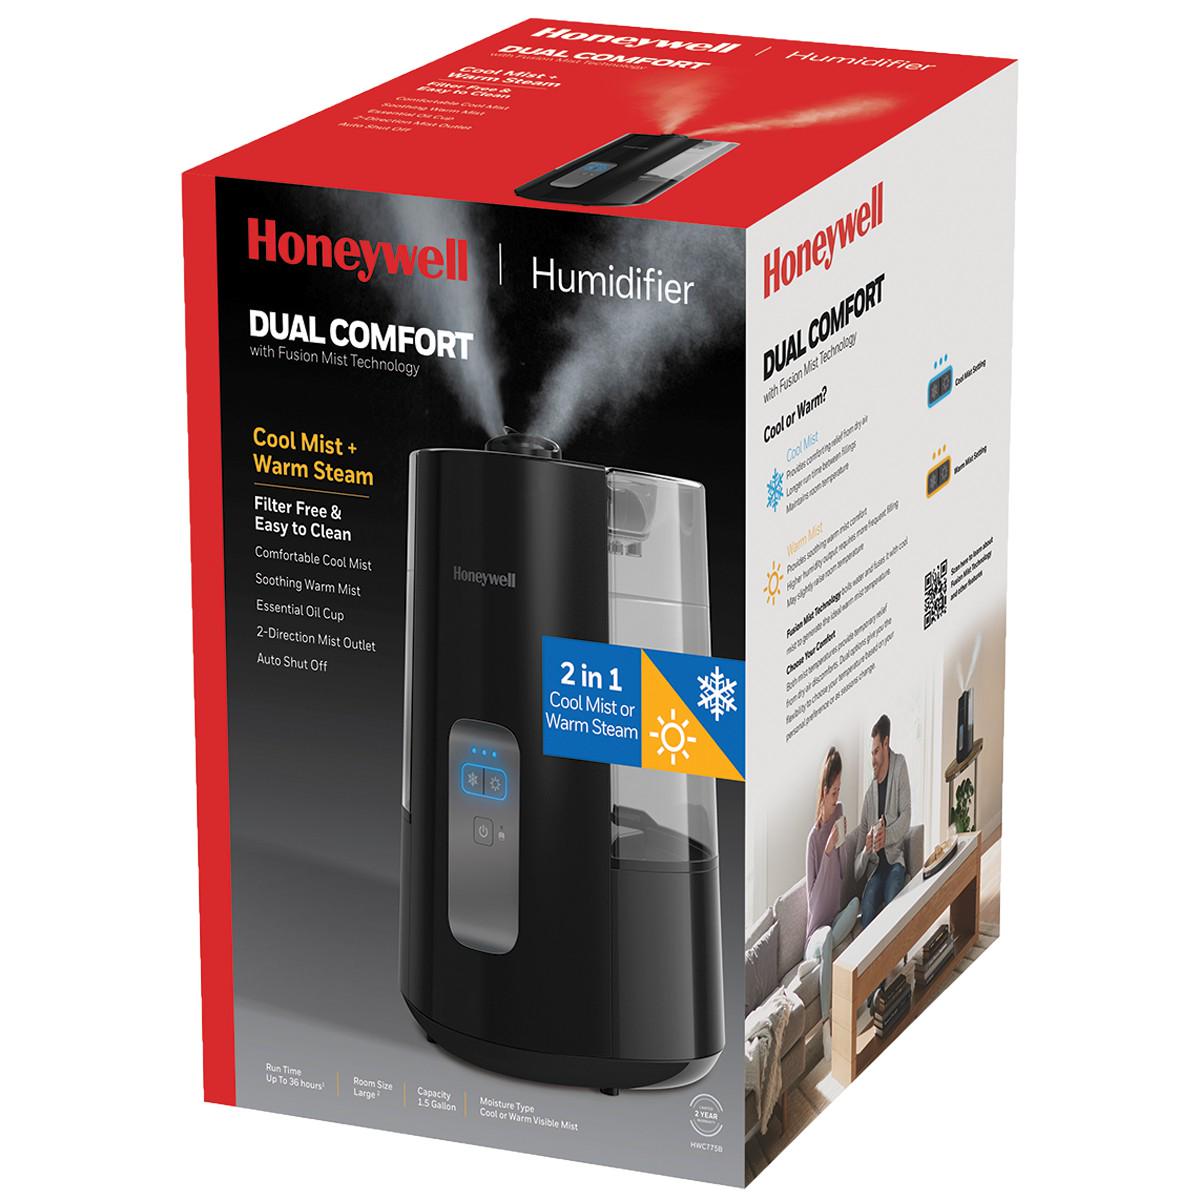 Honeywell Dual Comfort Cool + Warm Mist Humidifier with Fusion Mist Technology for Large Rooms HWC775B Black  Crowdfused